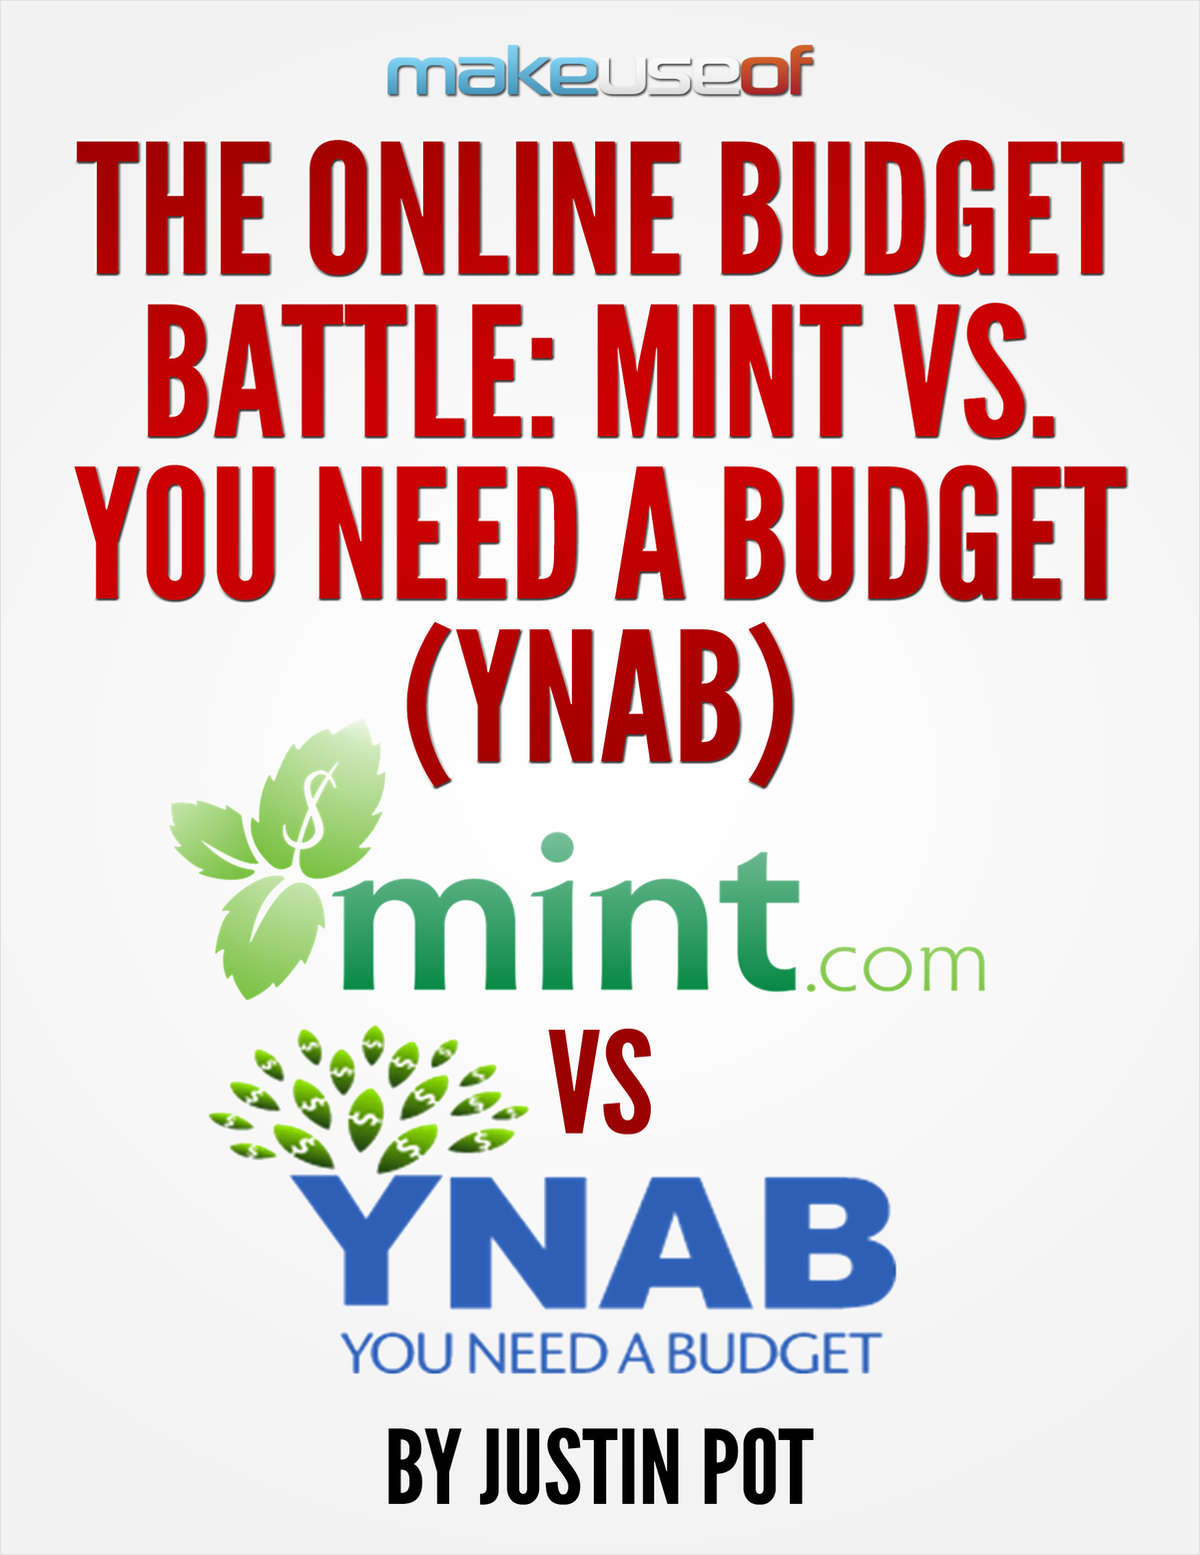 The Online Budget Battle: Mint vs. You Need a Budget (YNAB)